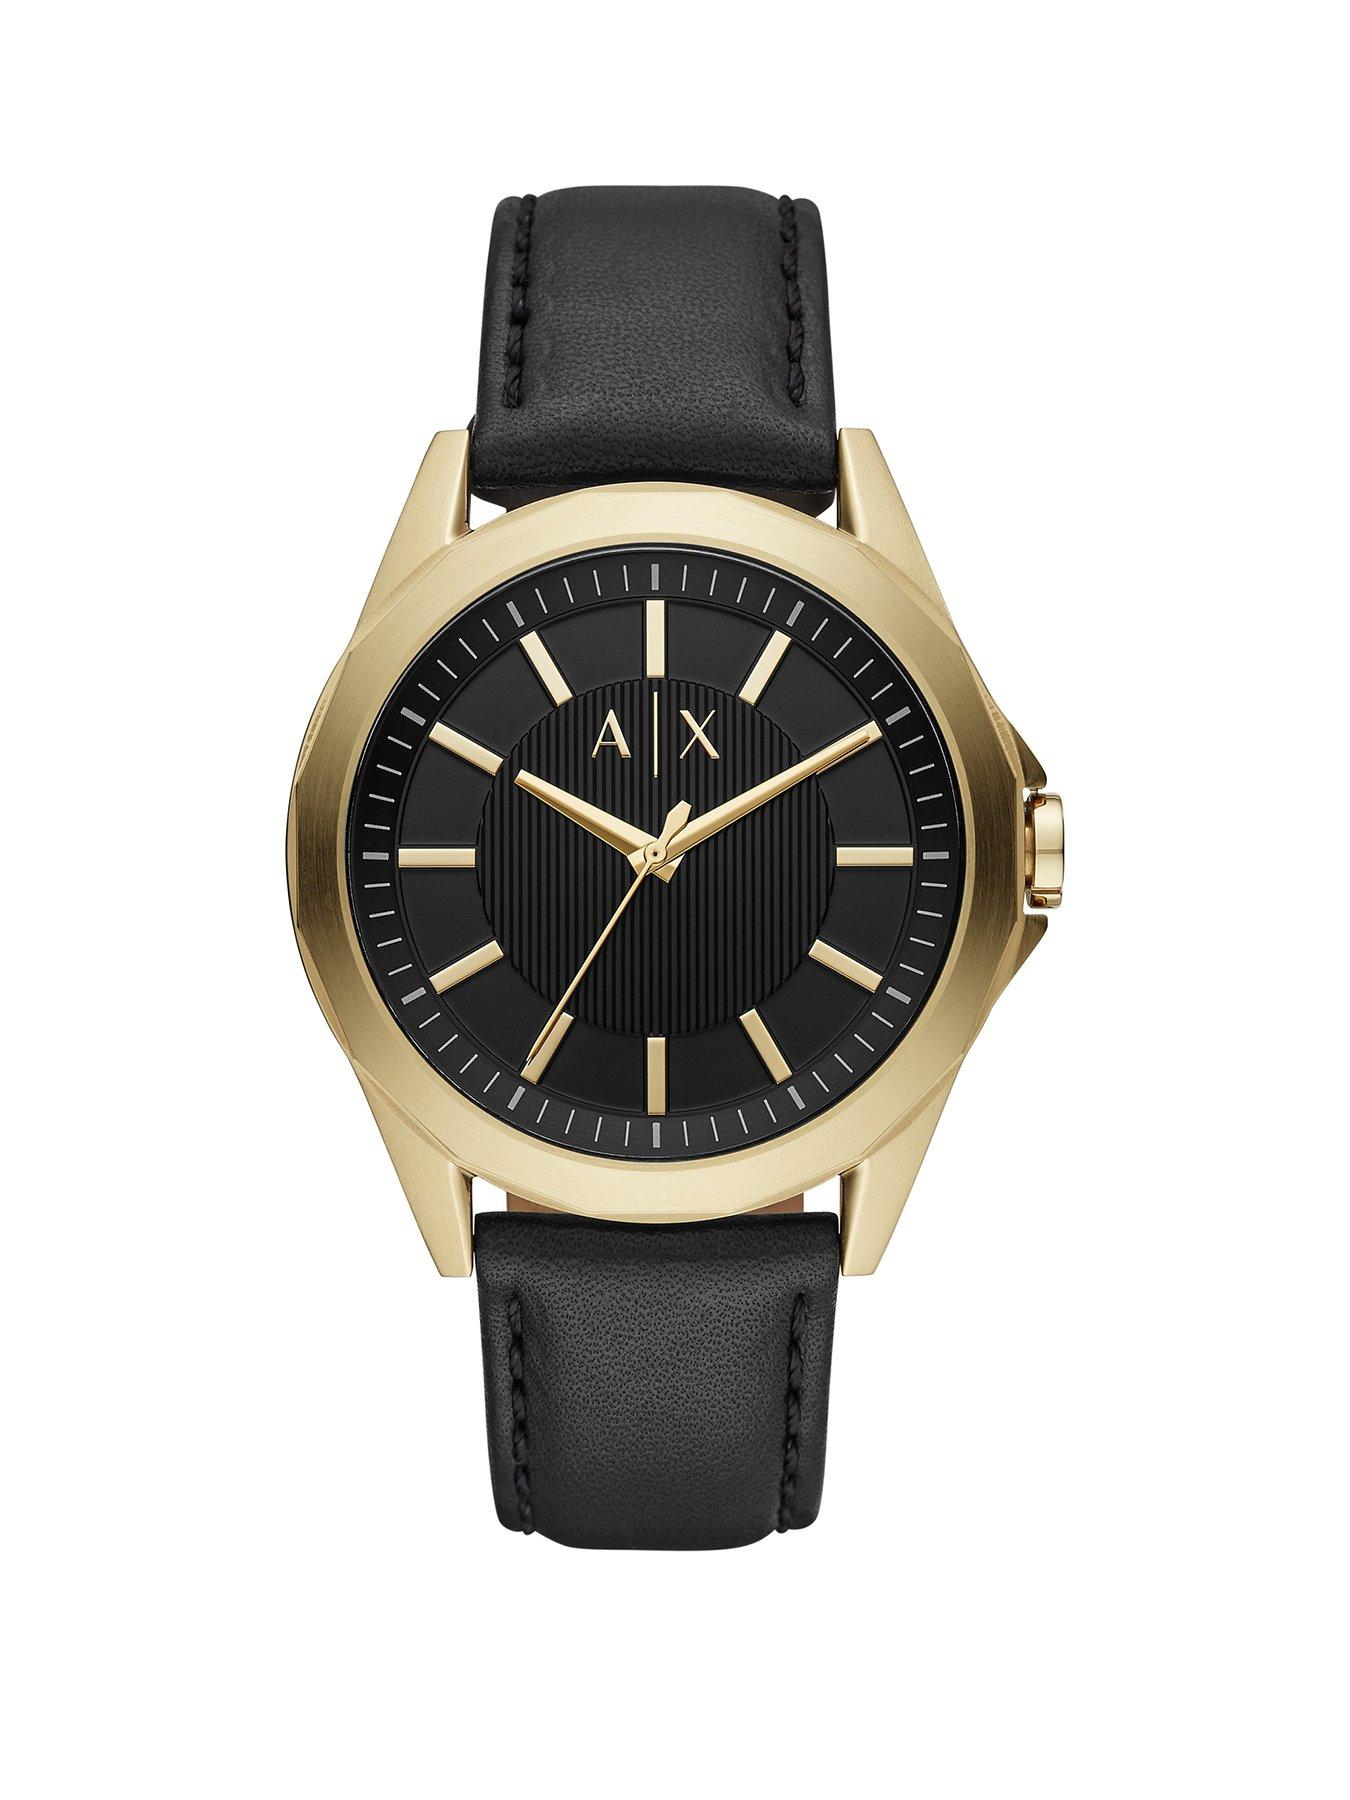 armani exchange watch black and gold